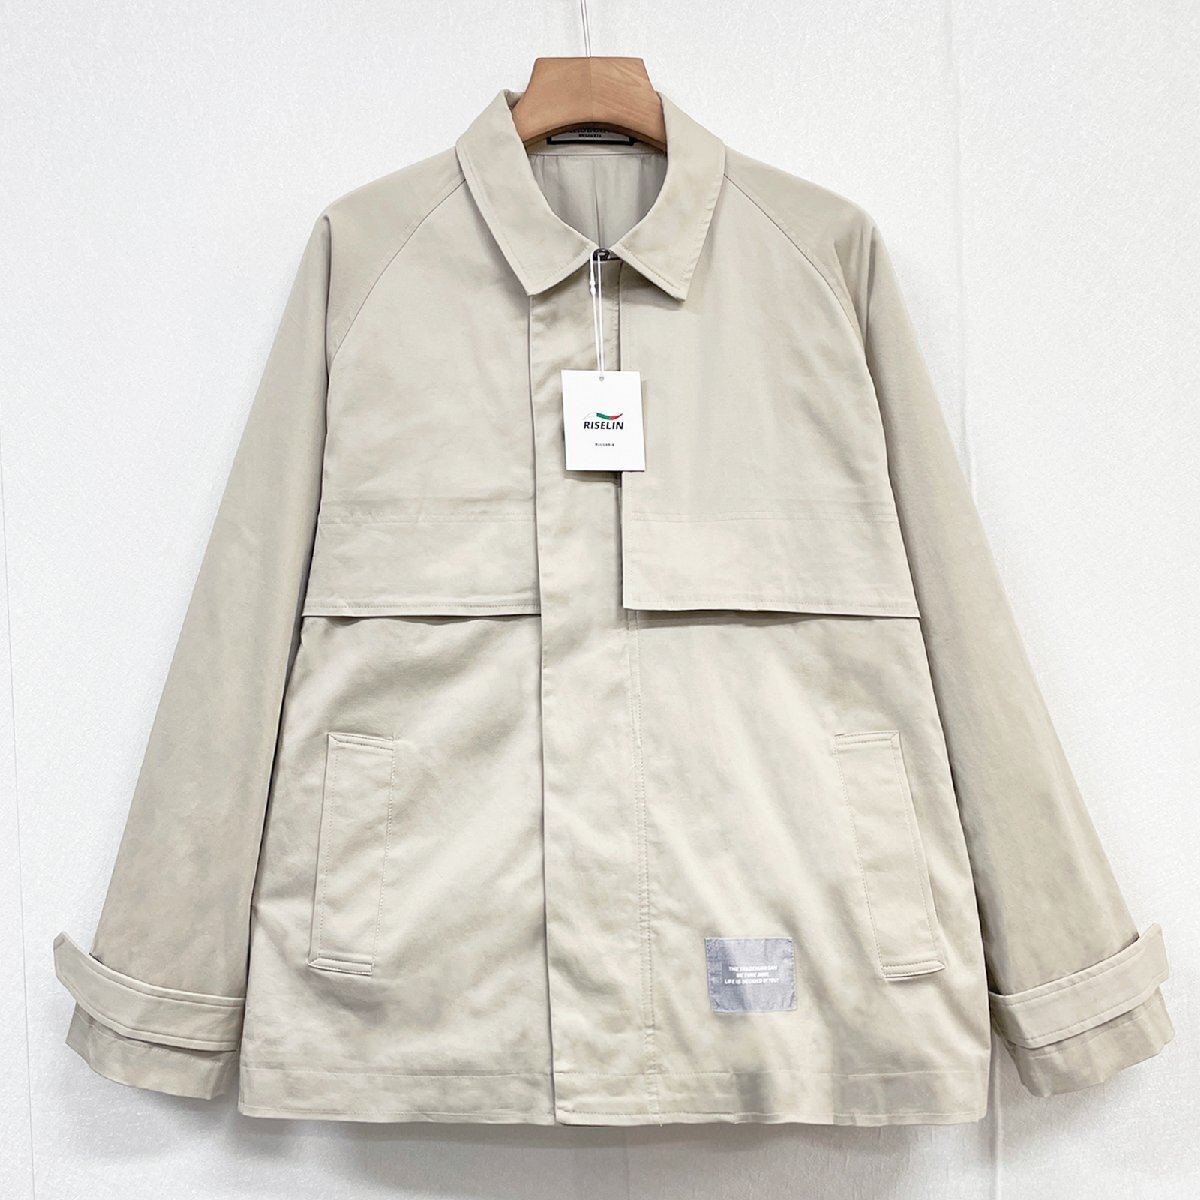  top class Europe made * regular price 6 ten thousand * BVLGARY a departure *RISELIN jacket standard .. ventilation comfortable plain outdoor stylish everyday put on spring summer 2XL